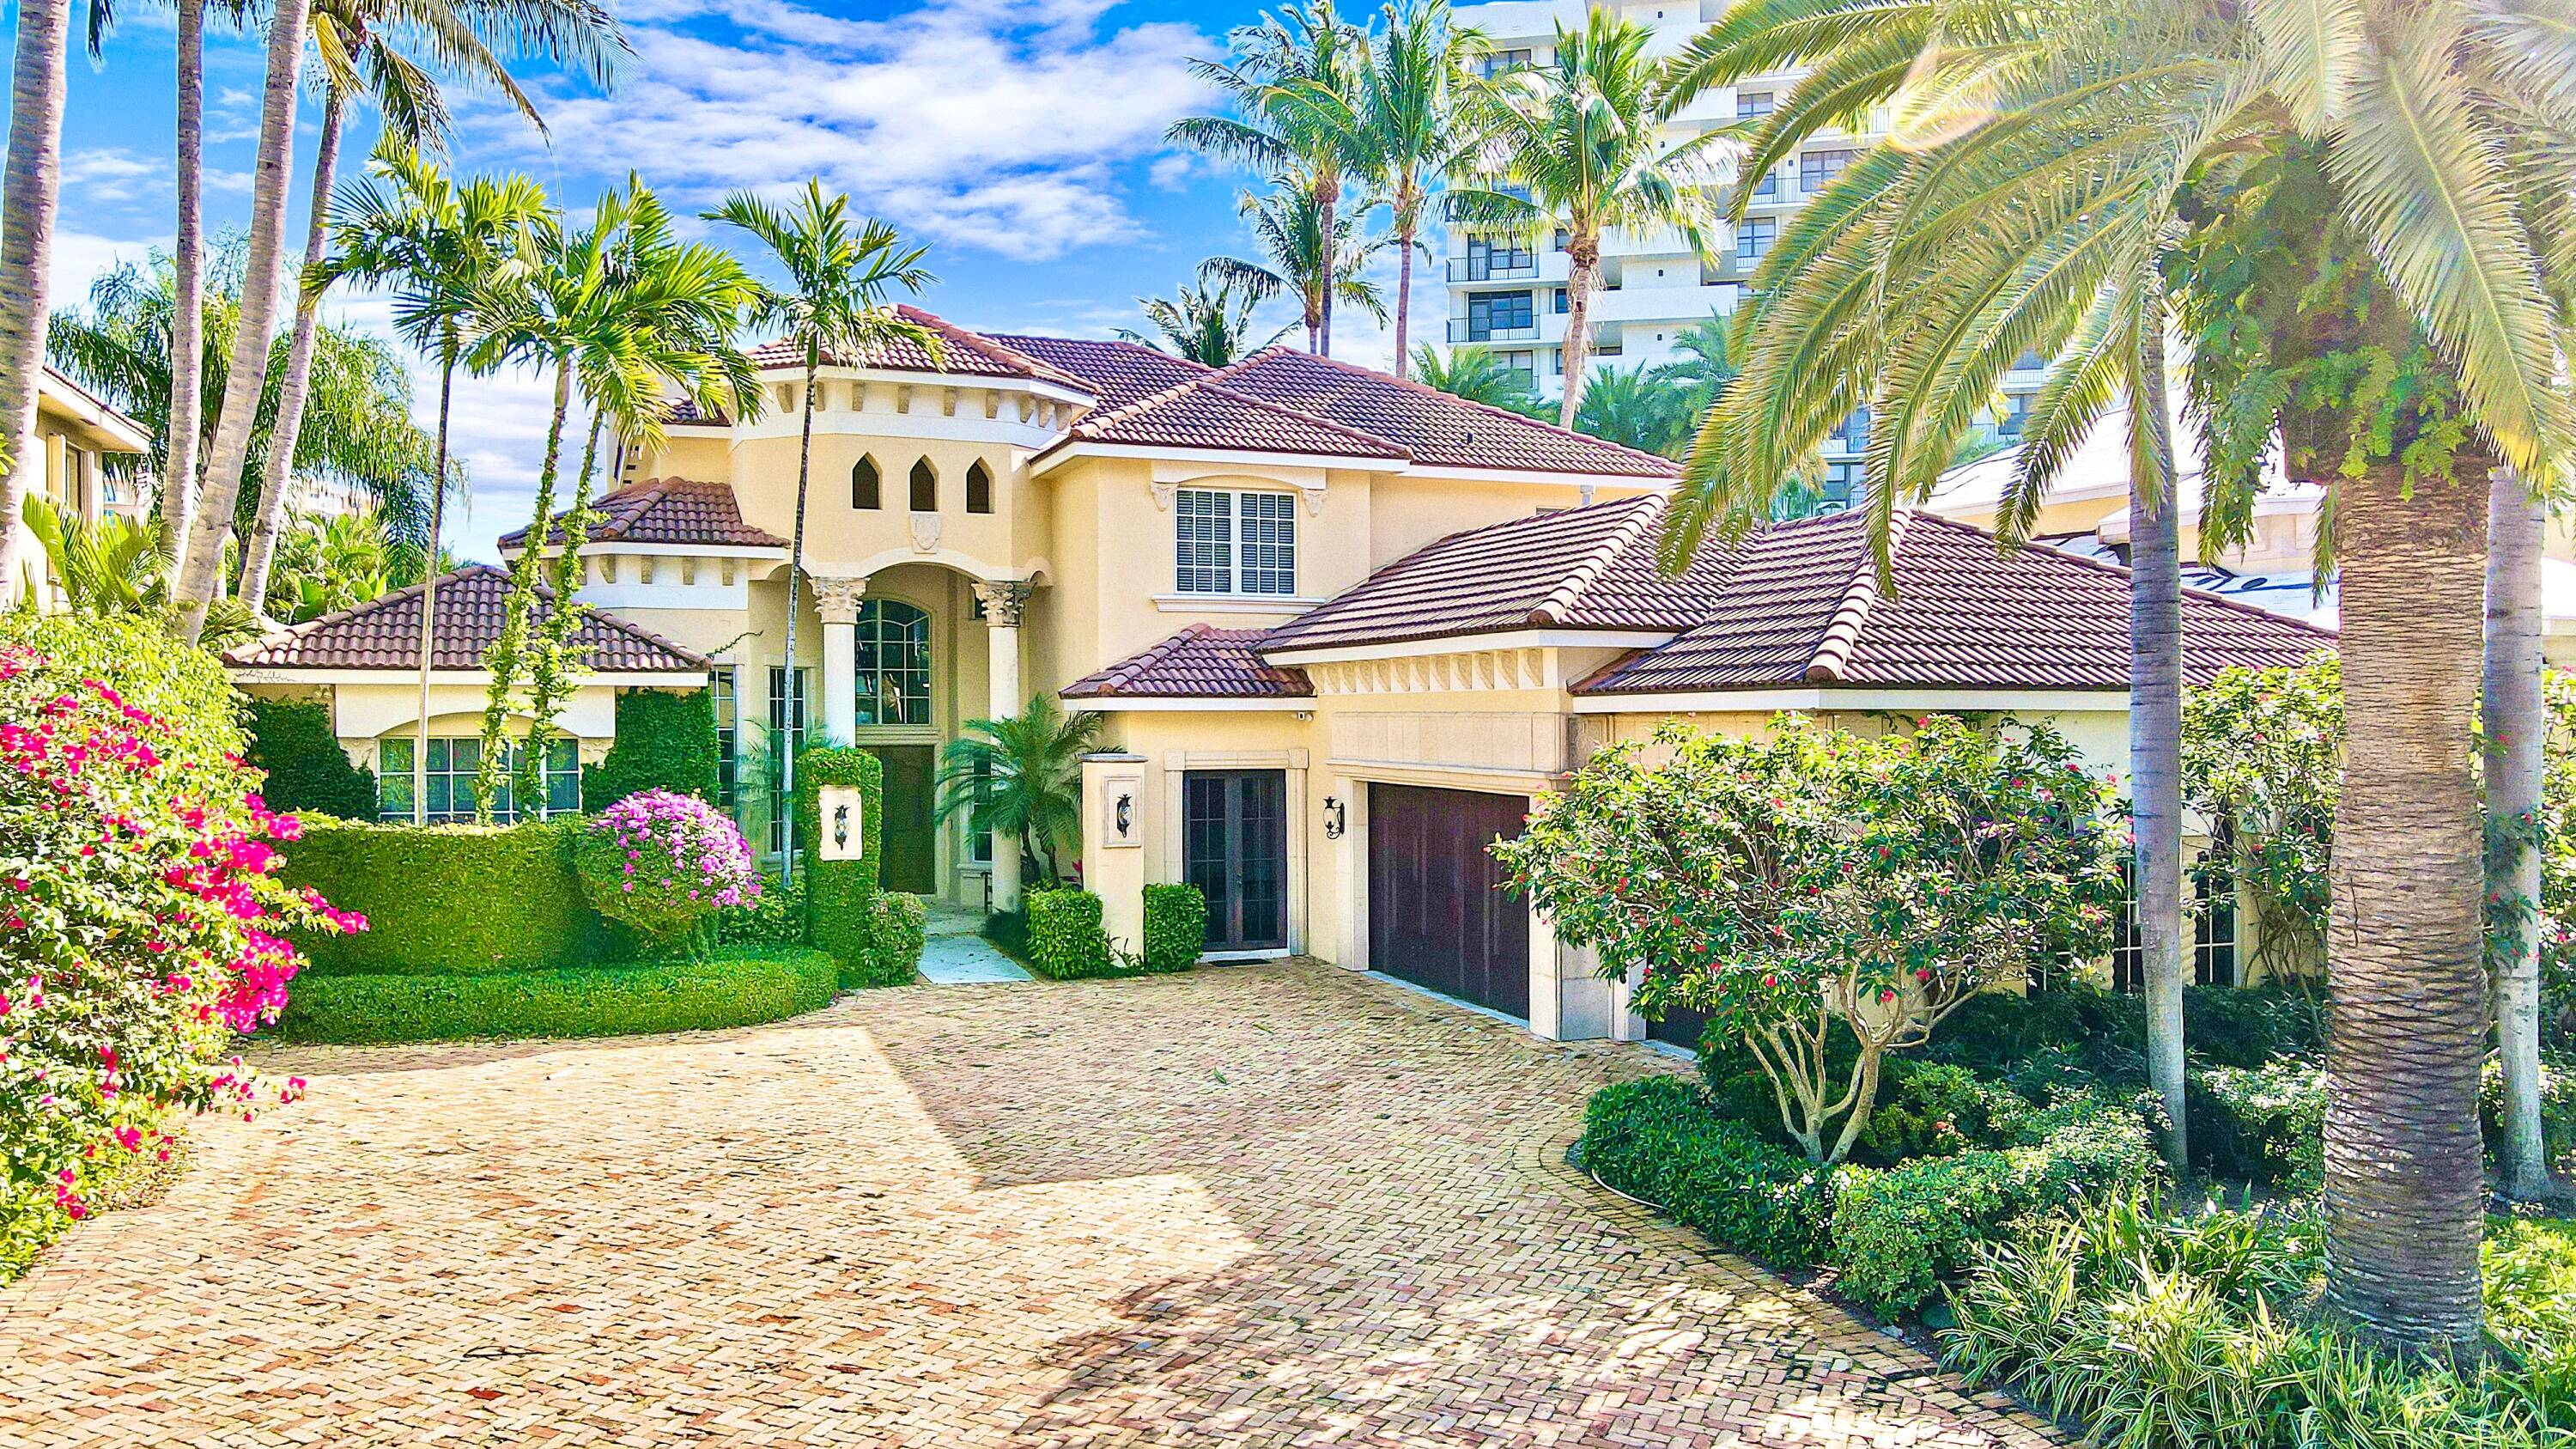 Set on 1 3 acre of lush, tropical landscaping and tucked away in an enchanted corner of the manicured grounds of Boca Highland Beach Club and Marina, this strikingly beautiful ...